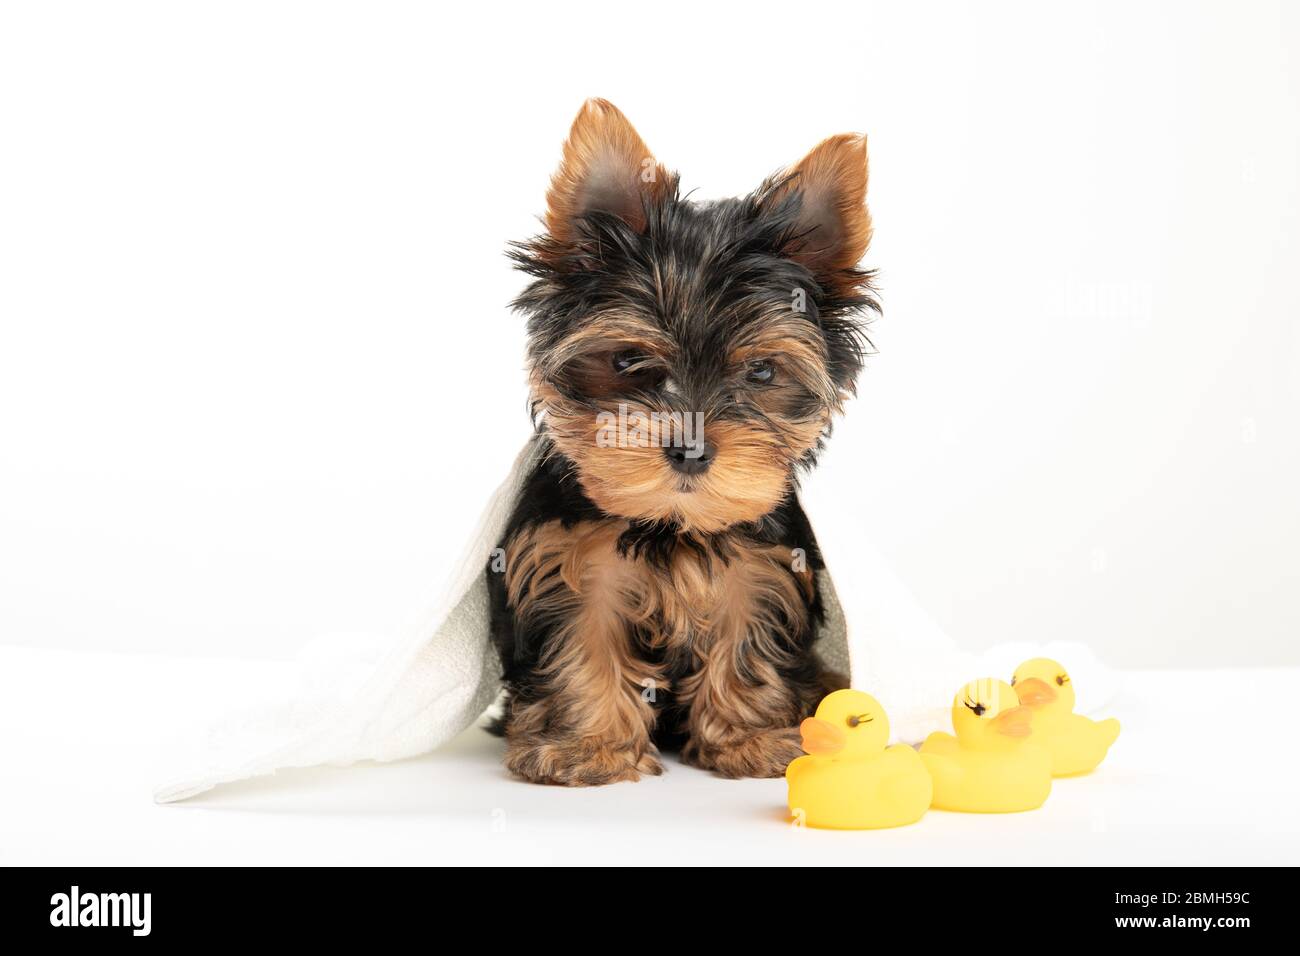 Bathing a little puppy. Yorkshire Terrier puppy in a towel with a rubber duck. Yorkshire Terrier Stock Photo